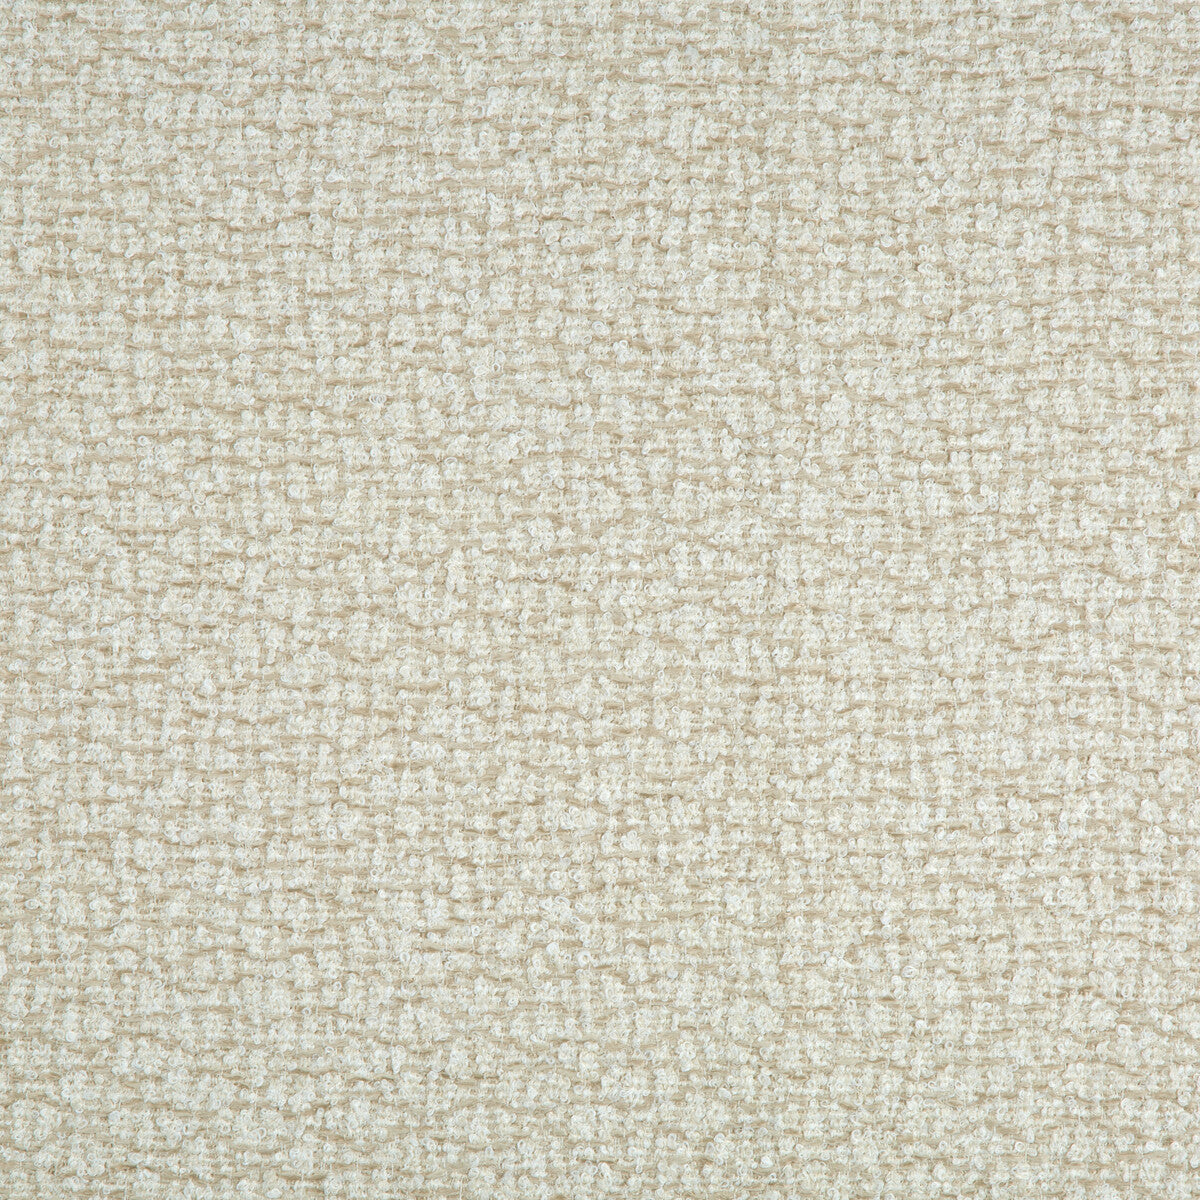 Rios fabric in sand color - pattern GWF-3782.16.0 - by Lee Jofa Modern in the Kelly Wearstler Oculum Indoor/Outdoor collection